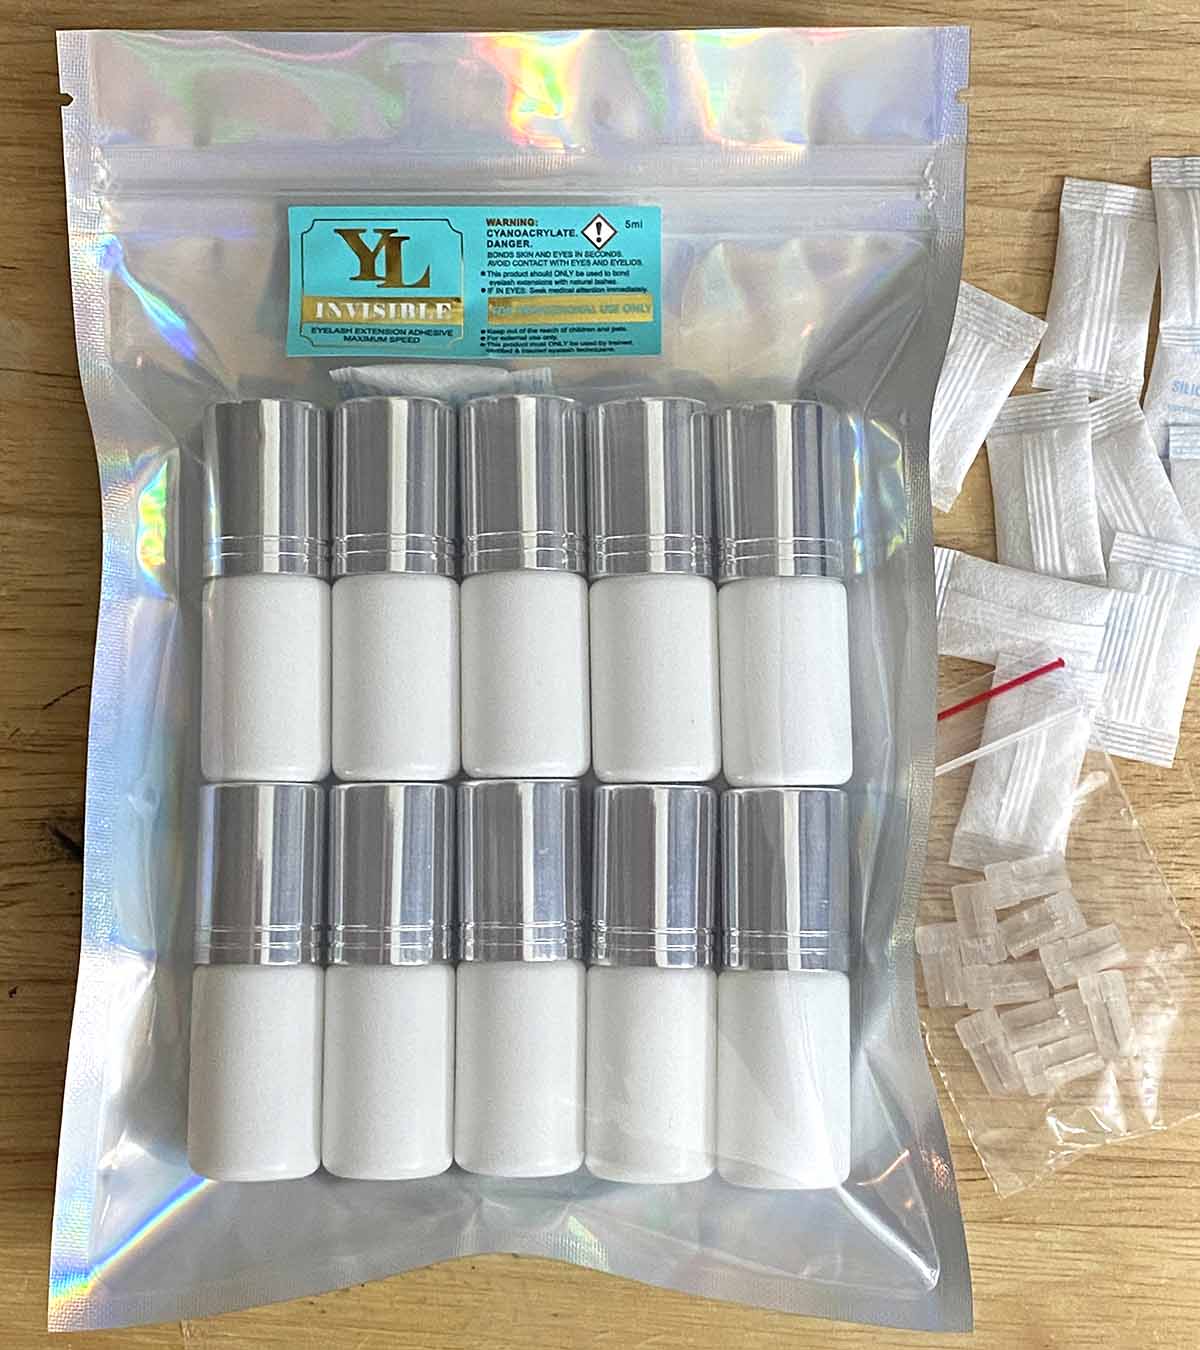 Lash Extension Glue Private Label Bulk Order - No Labeled Bottle 【not all colors are in stock , please contact us to check. If not in stock , we will ship in about two weeks】